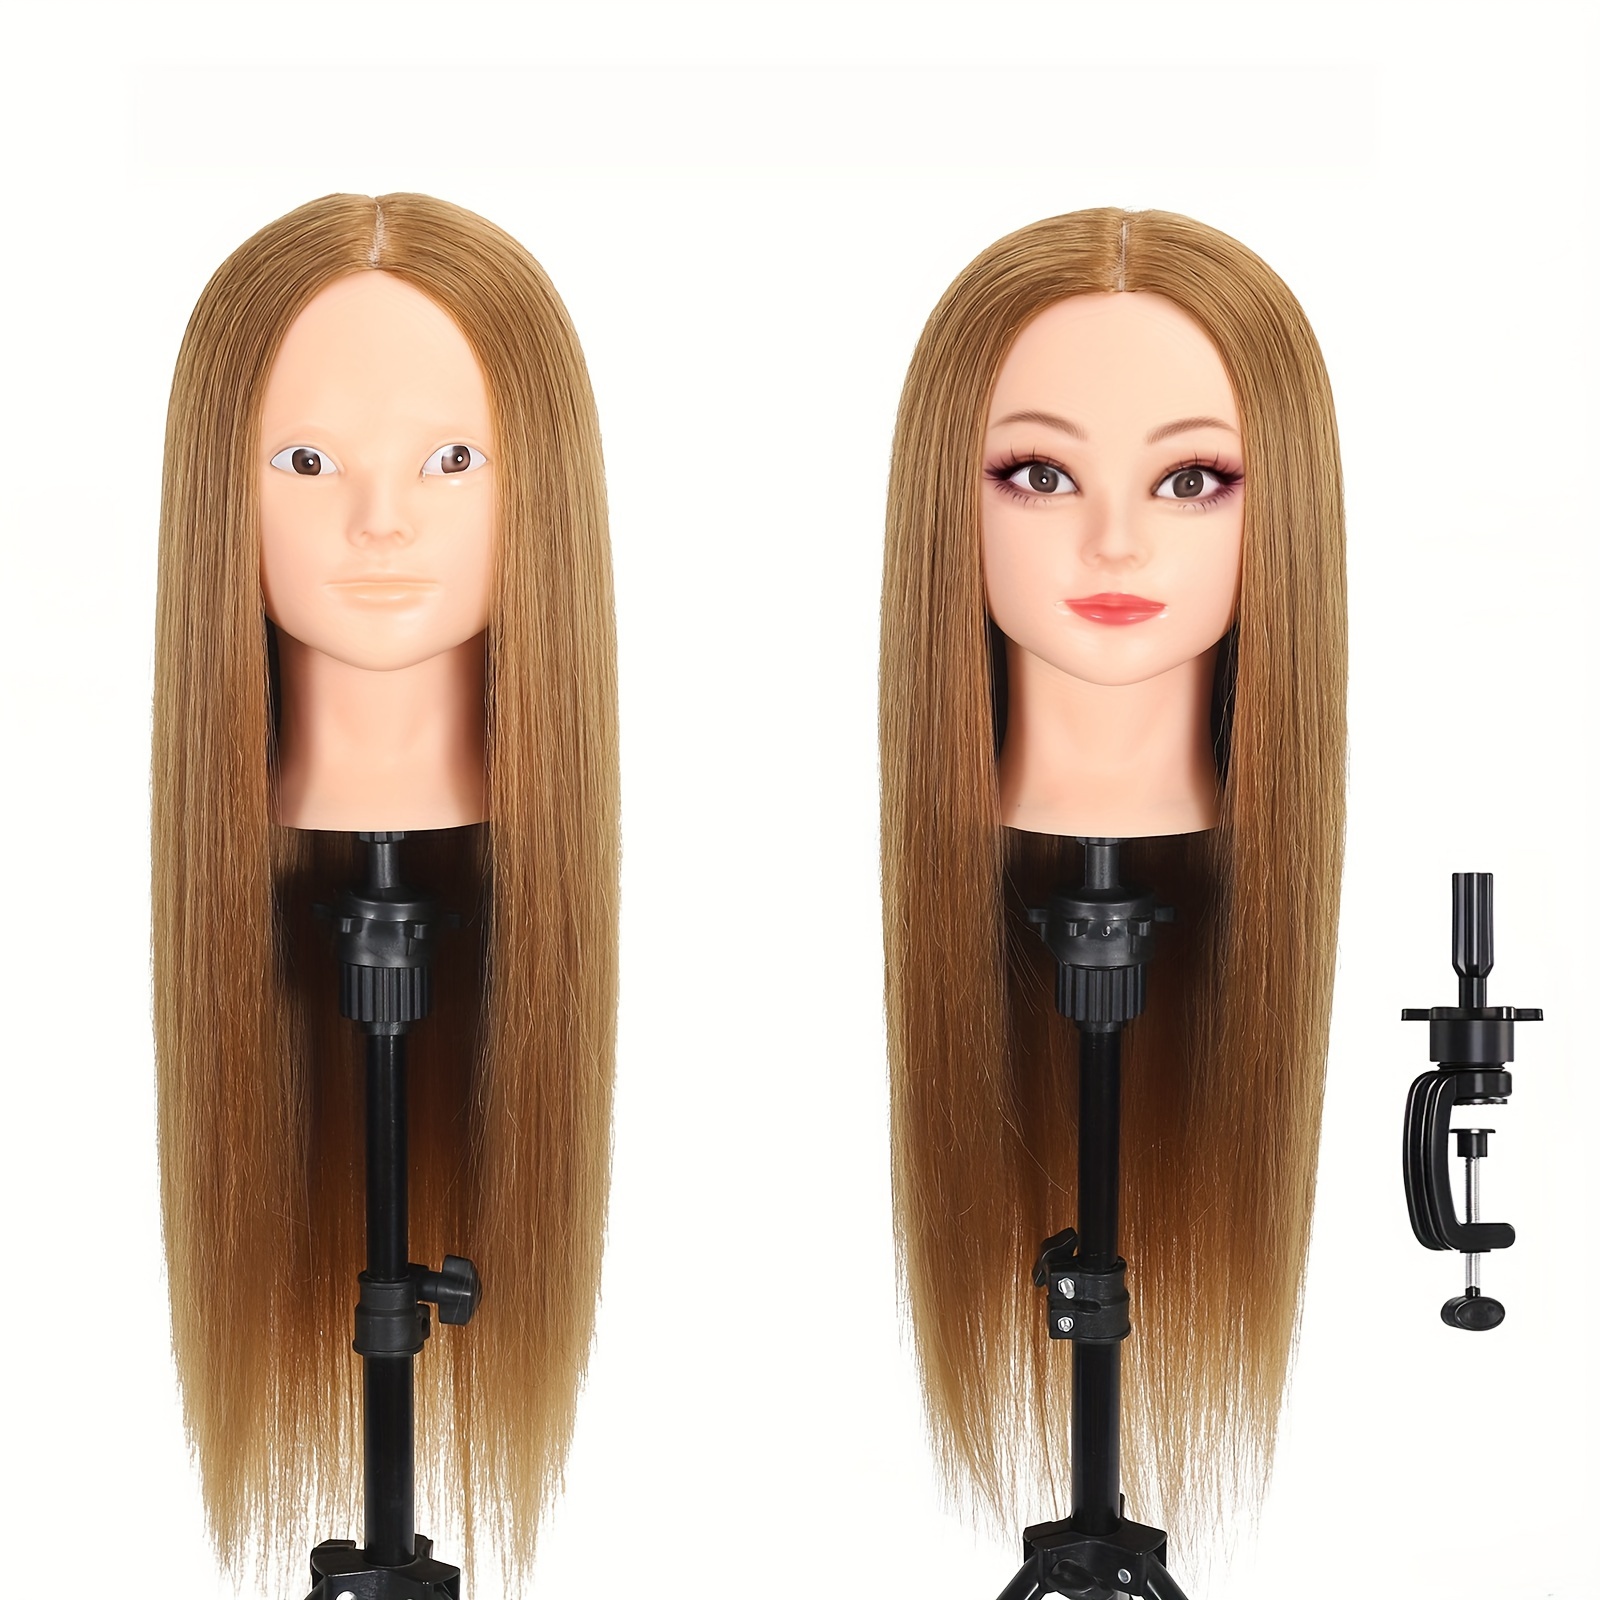  Maniquin Head with 80% Human Hair, 24Doll Head for Hair  Styling, Manikin Head with Real Hair, Practice Cosmetology Mannequin Head,  DIY Hairdressing Training Braiding Heads Set for Girls : Beauty